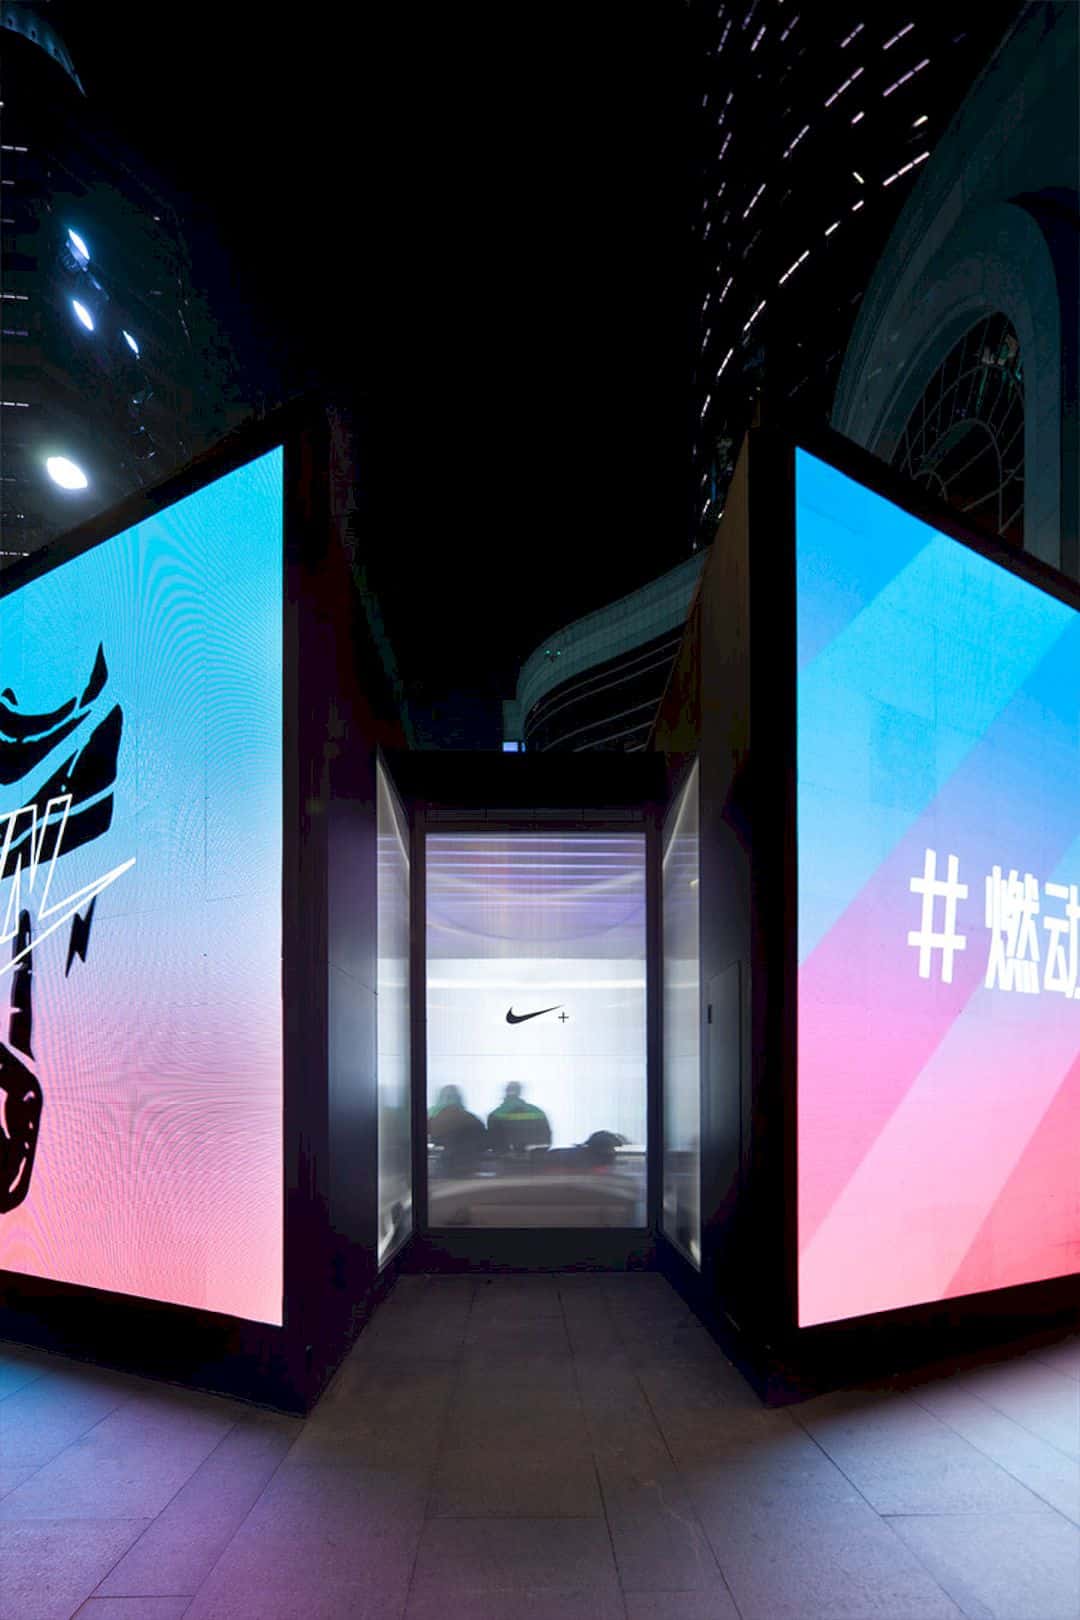 Nike Run Club A Pop Up Gym With Ethereal And Out Of This World Design 2